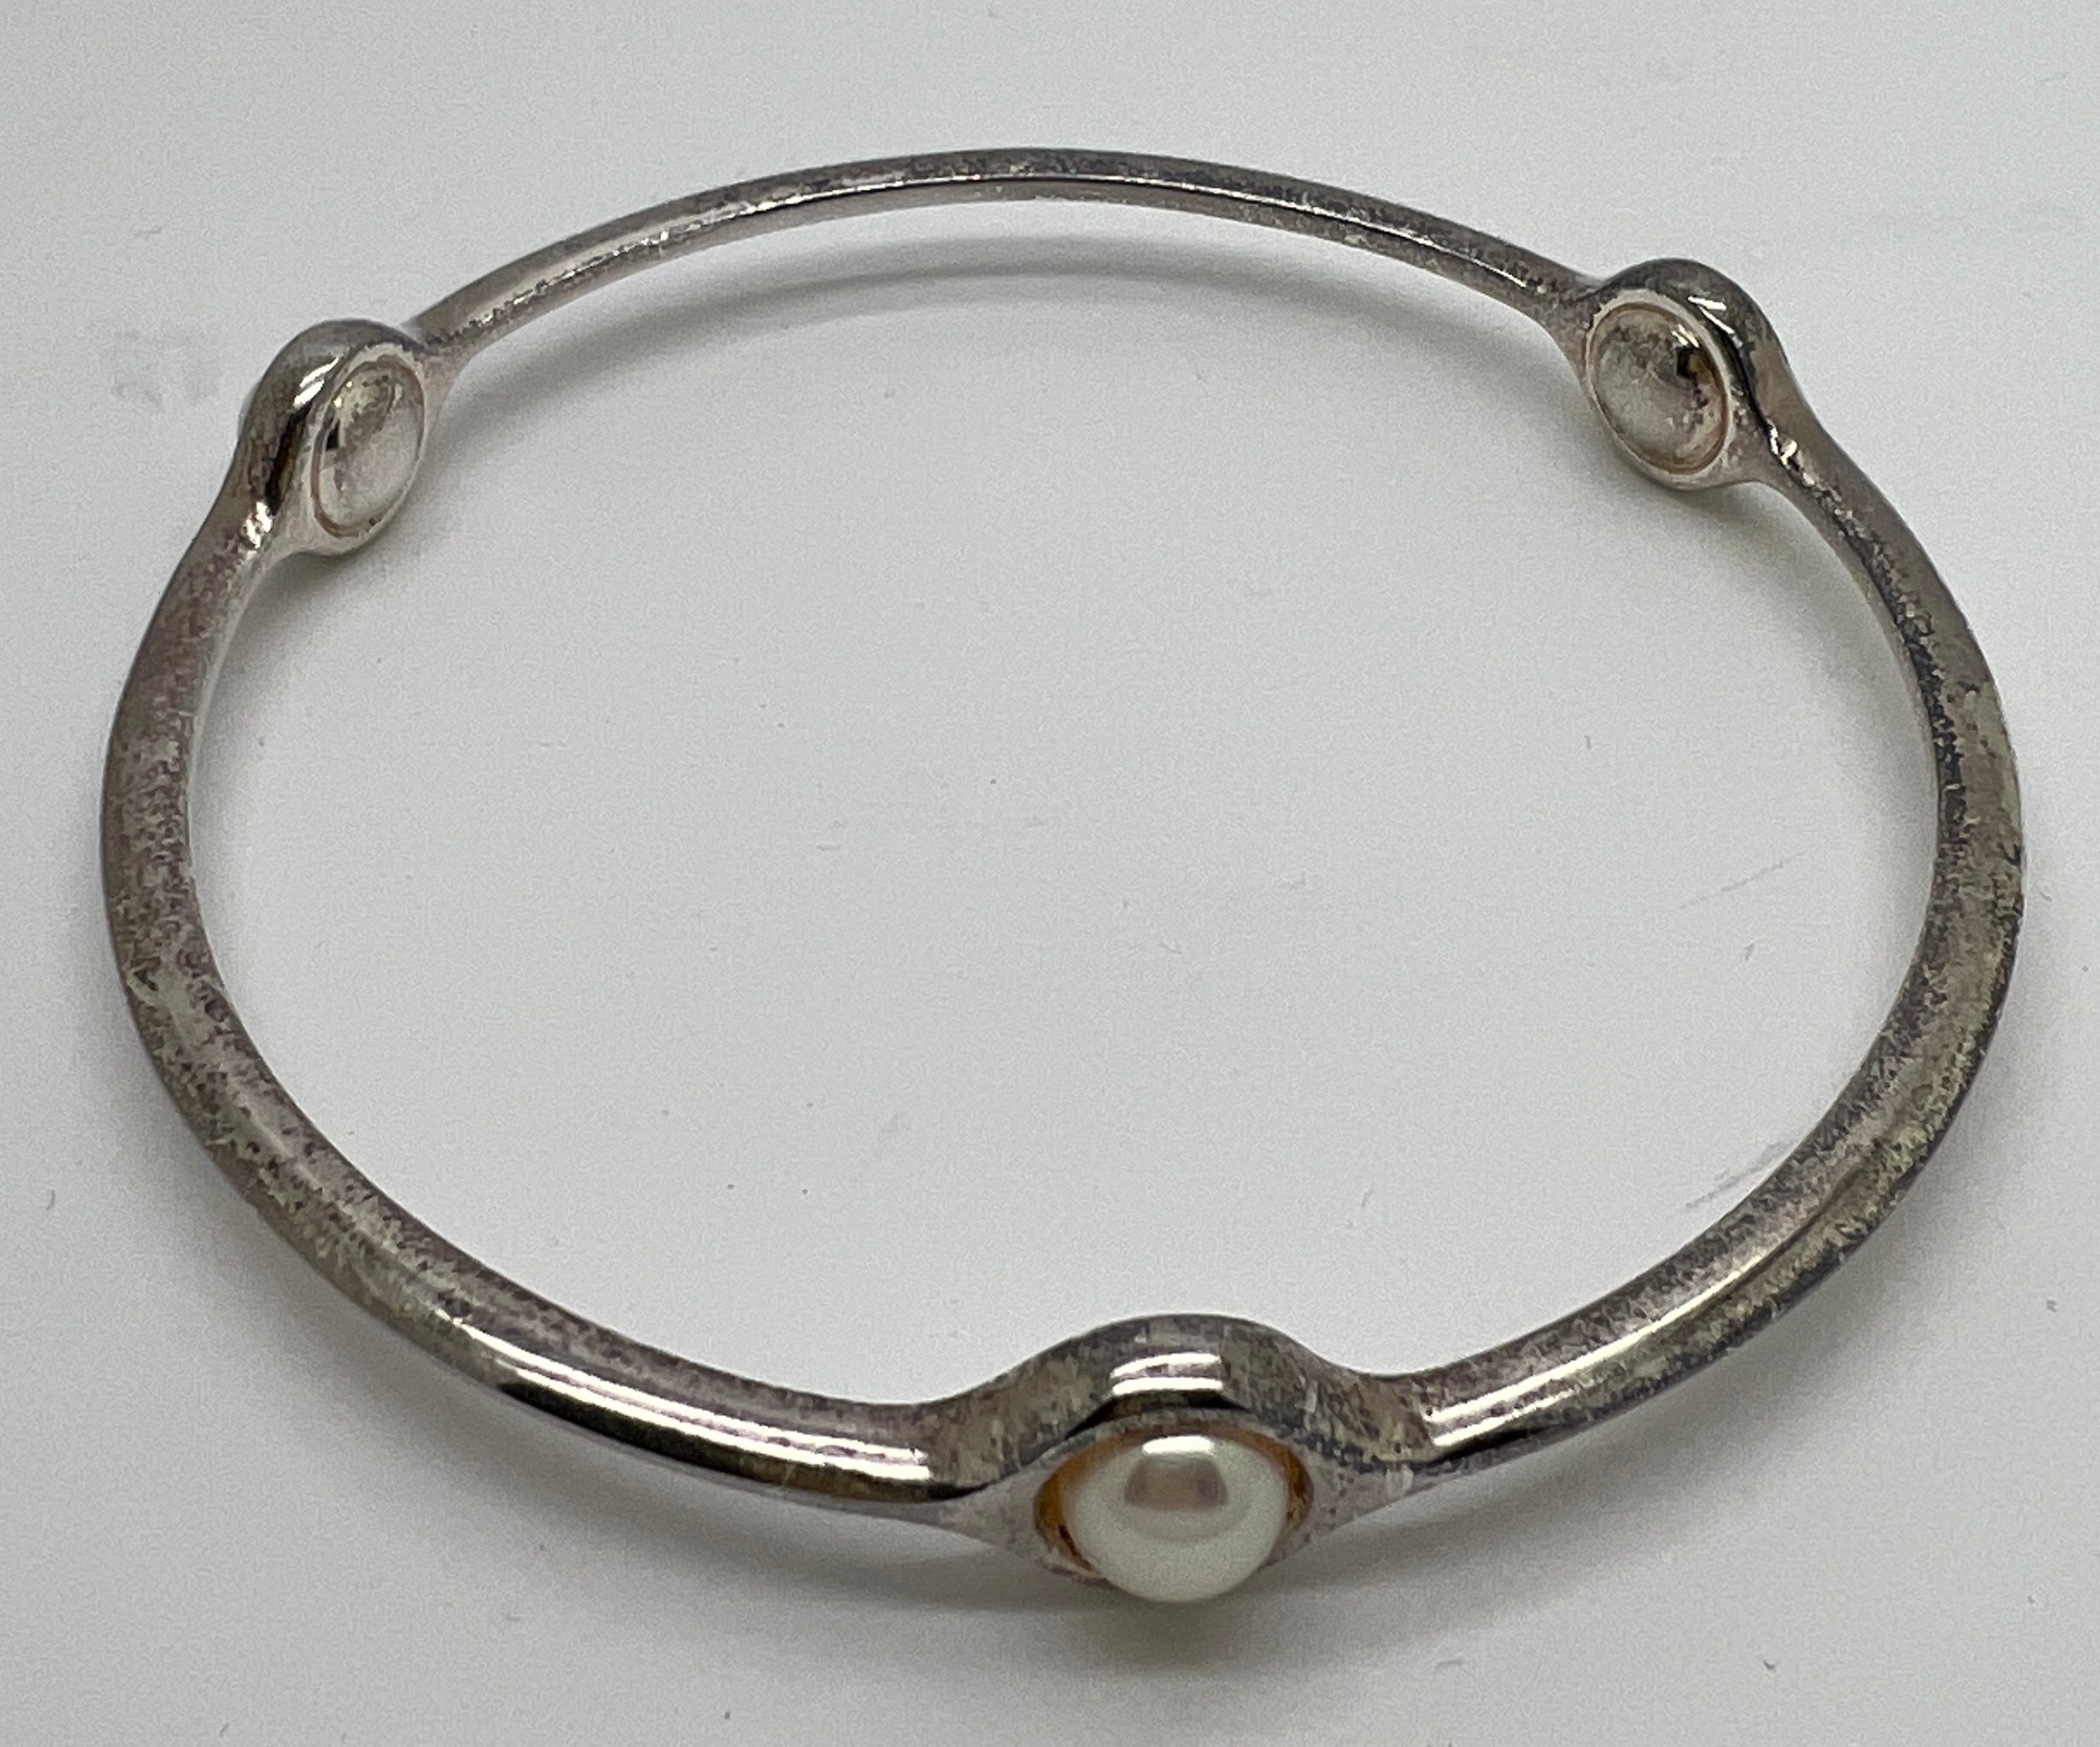 A Georg Jensen 473 sterling silver and pearl bangle. Interior measurement 6.5cm approximately.